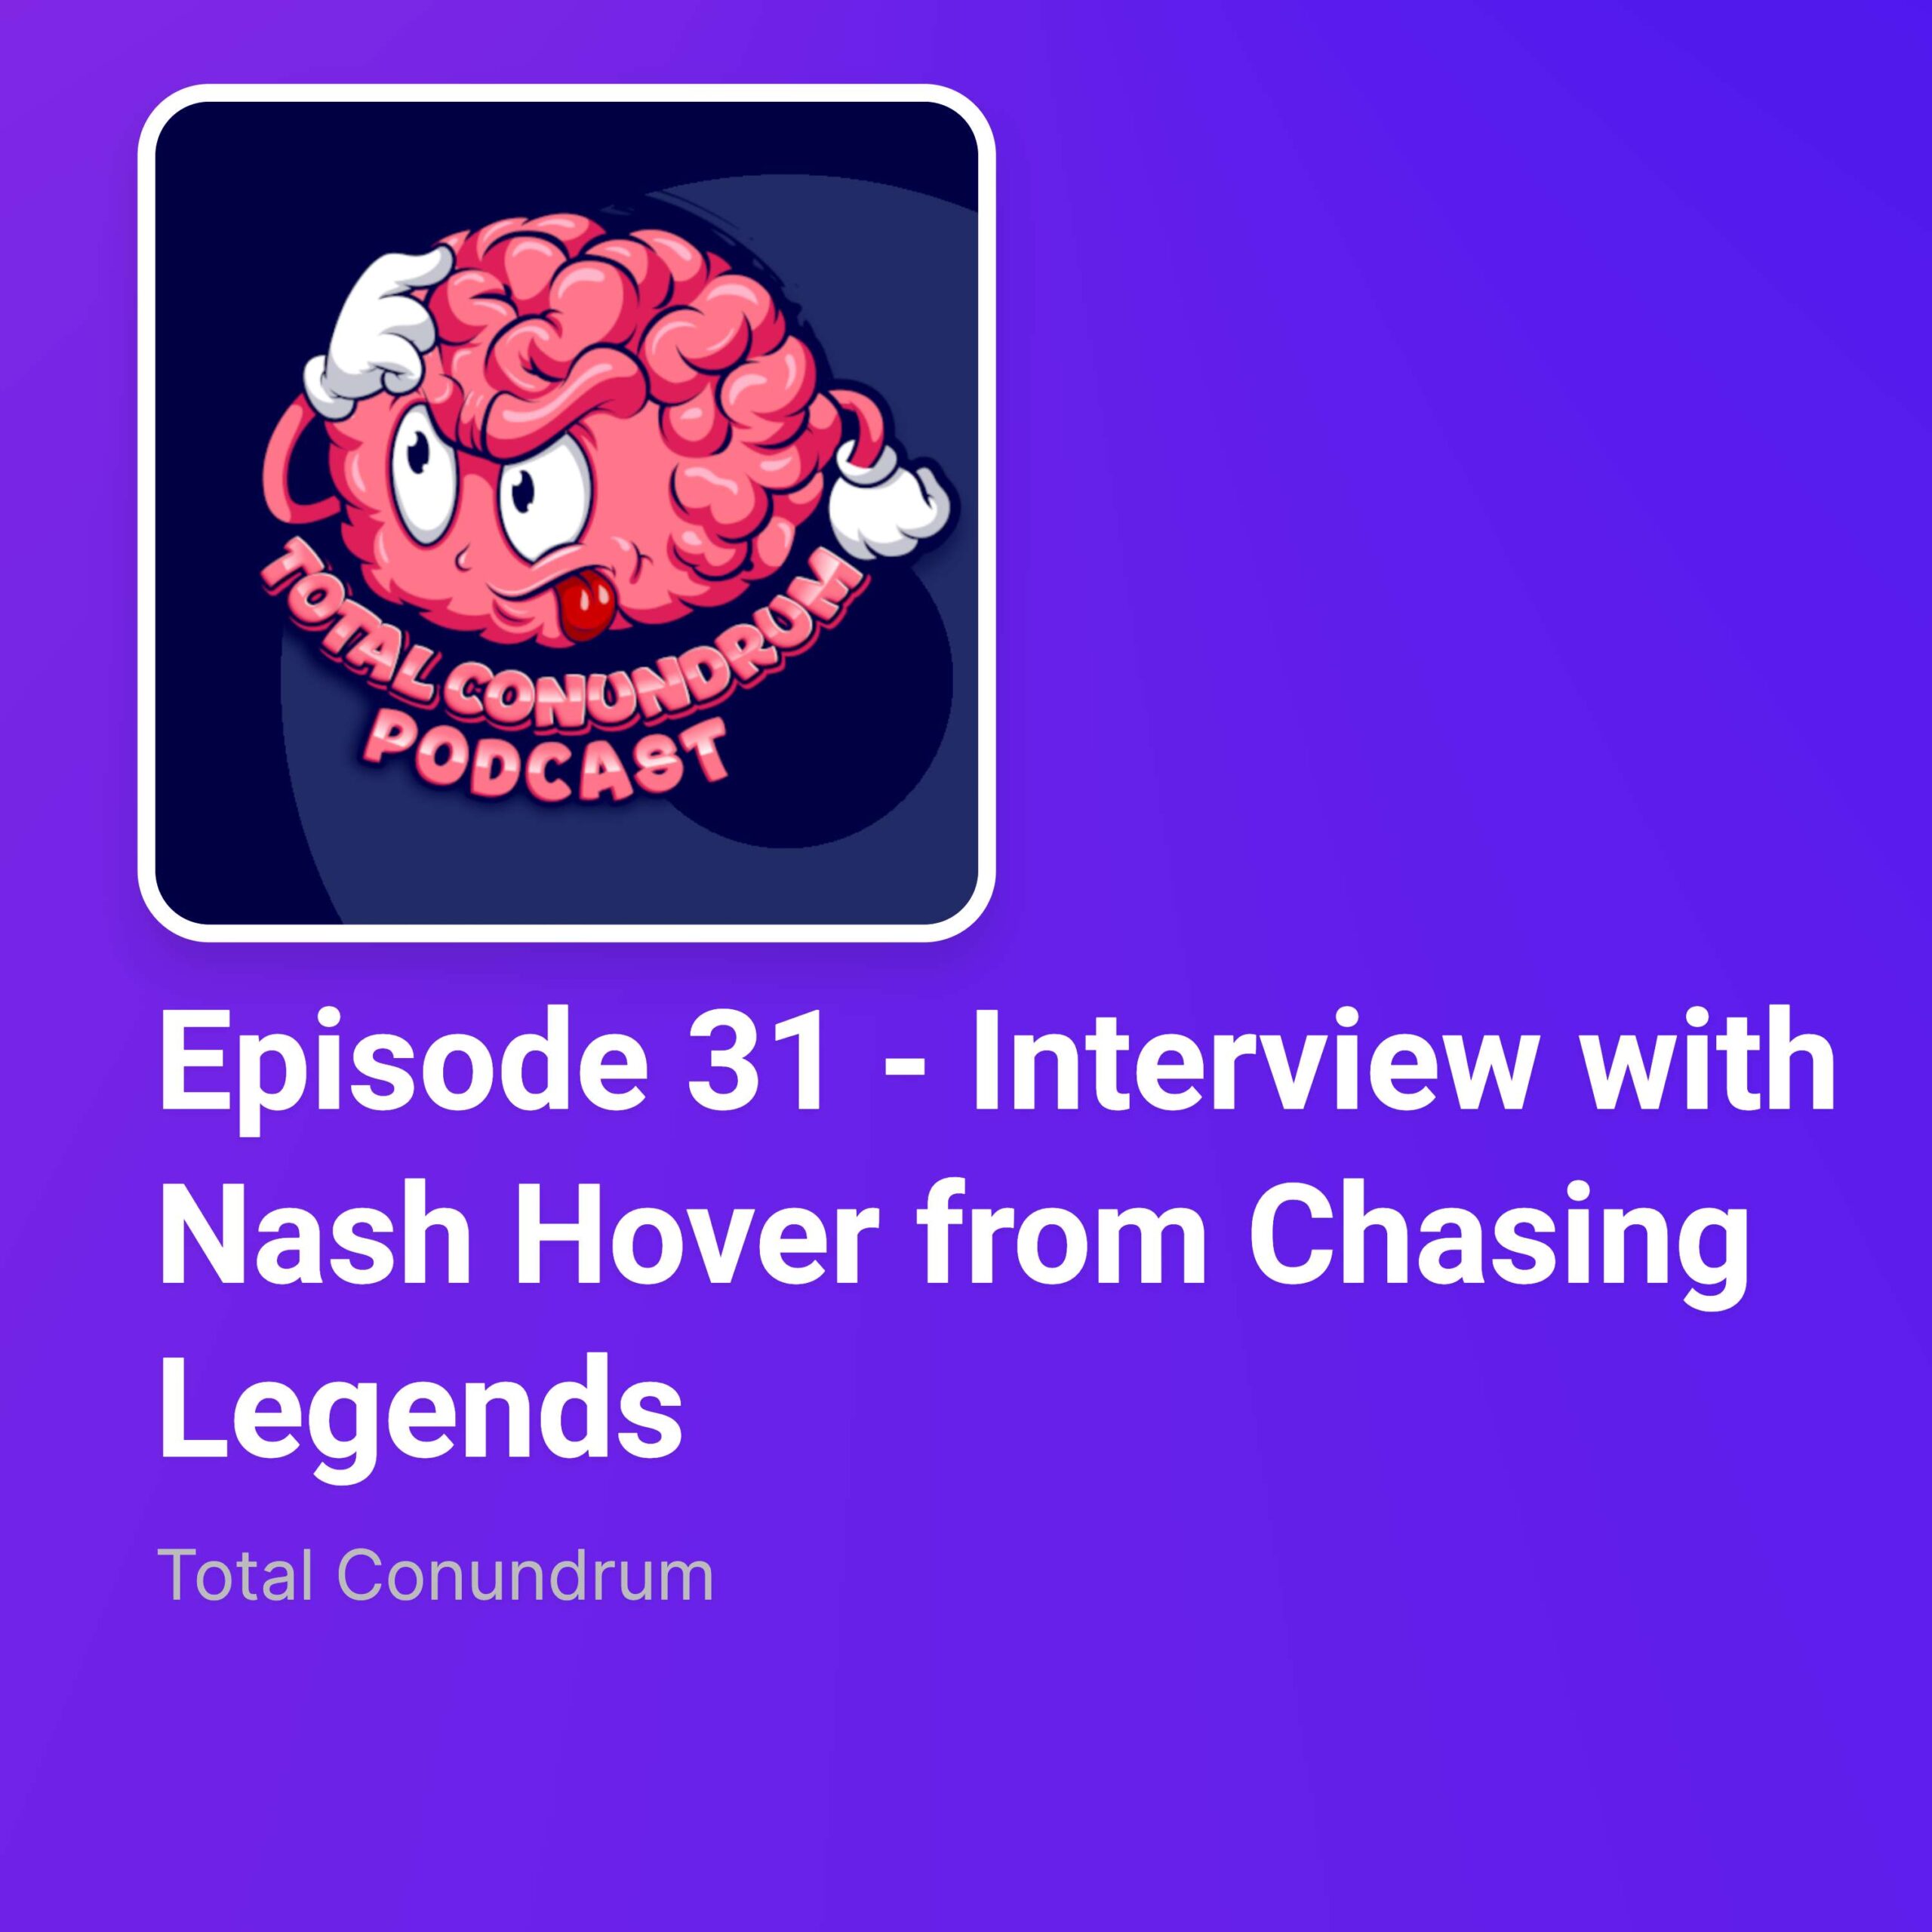 Episode 31 - Interview with Nash Hover from Chasing Legends